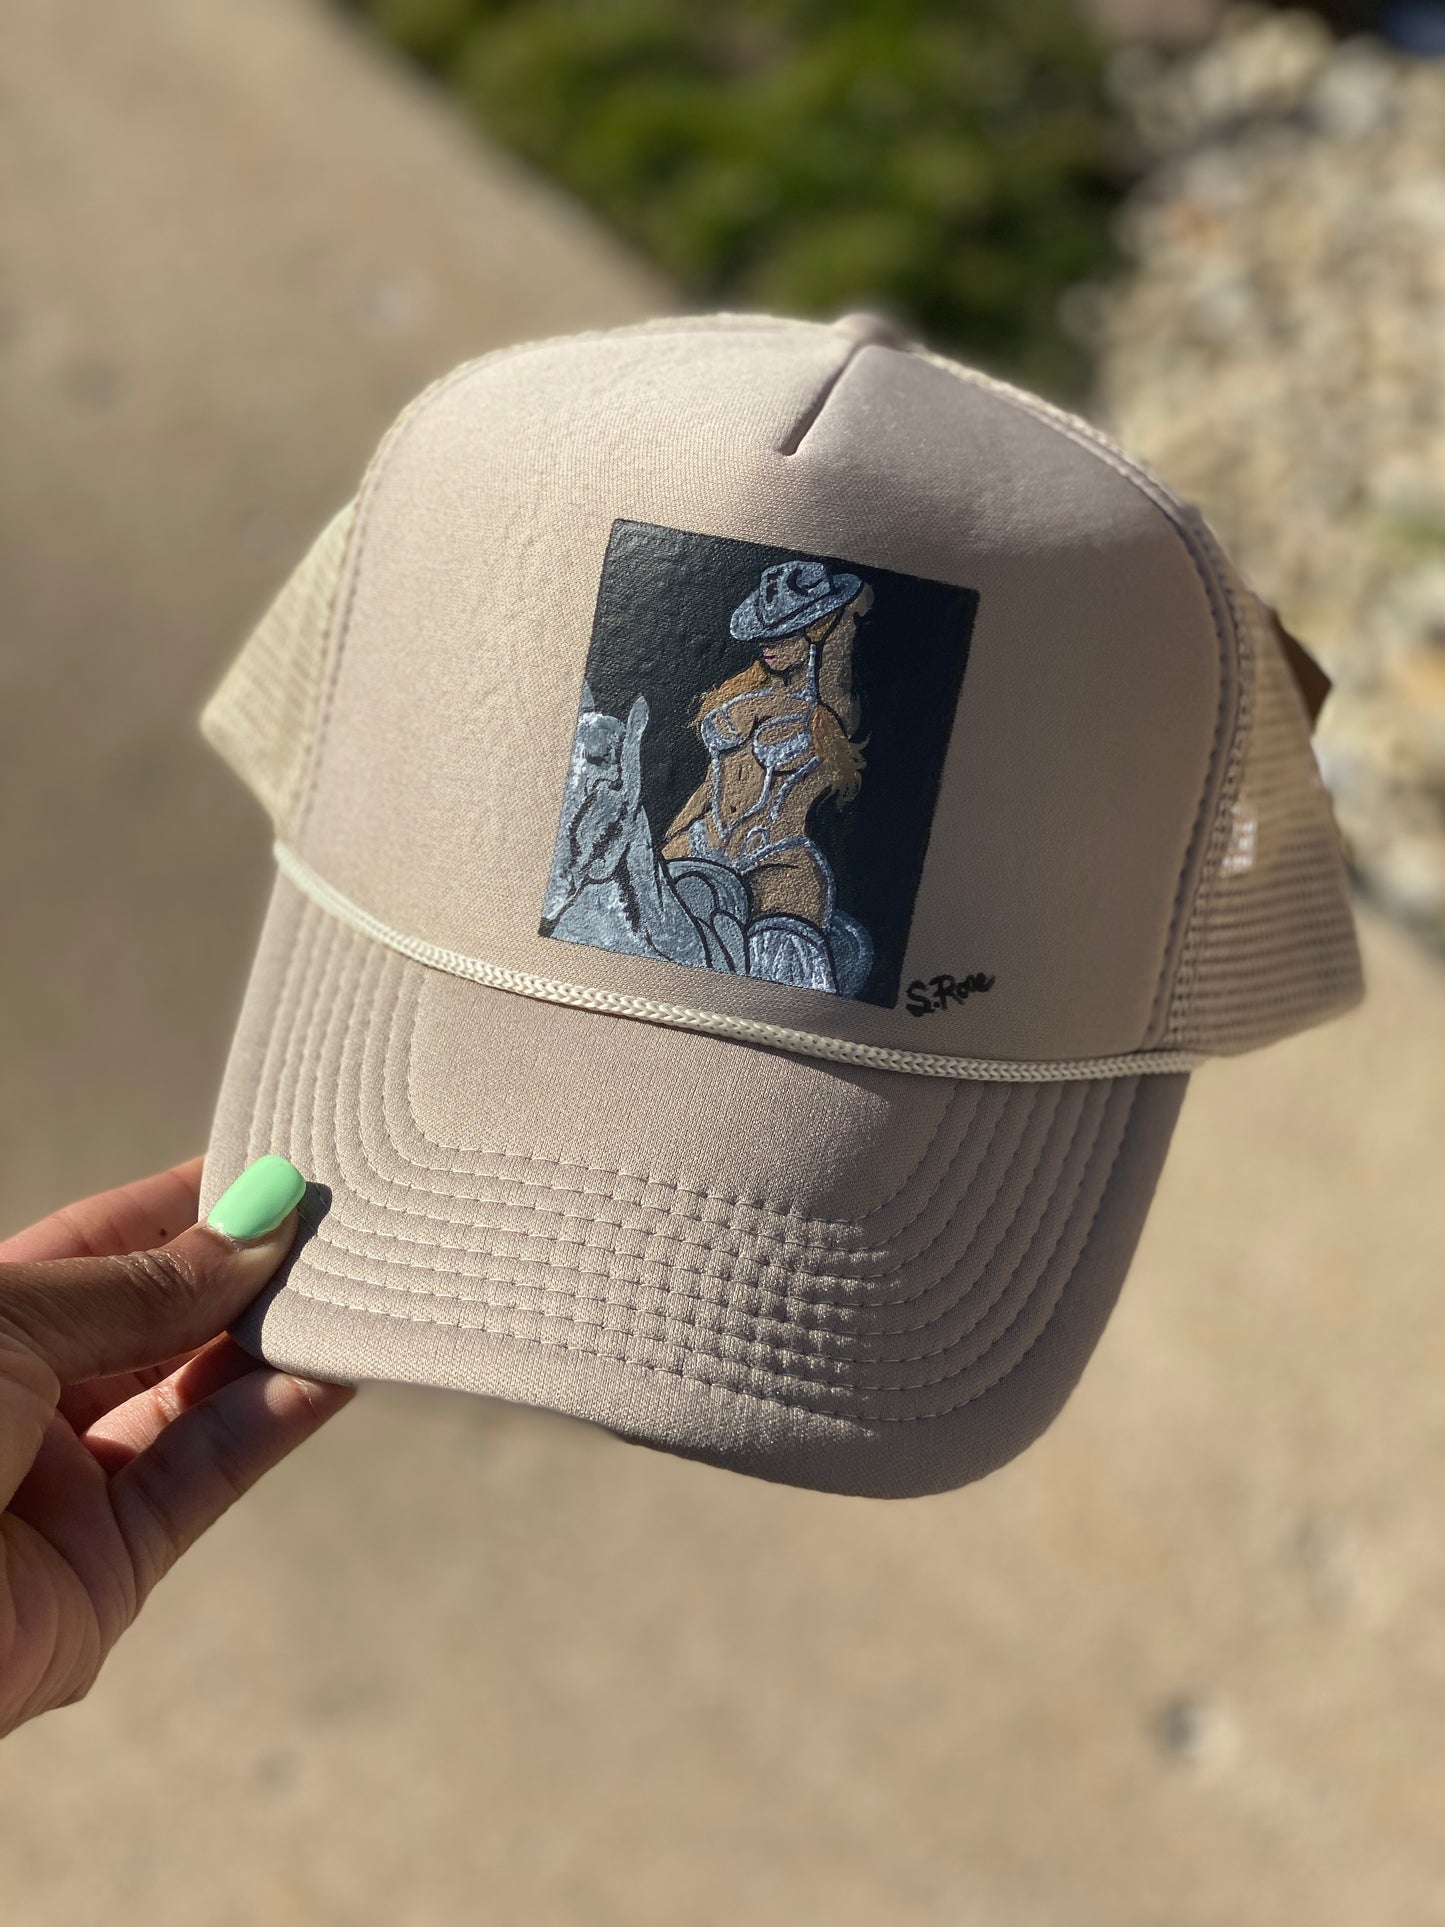 “Beyonce: Renaissance Zoom” Hand Painted Trucker Hat